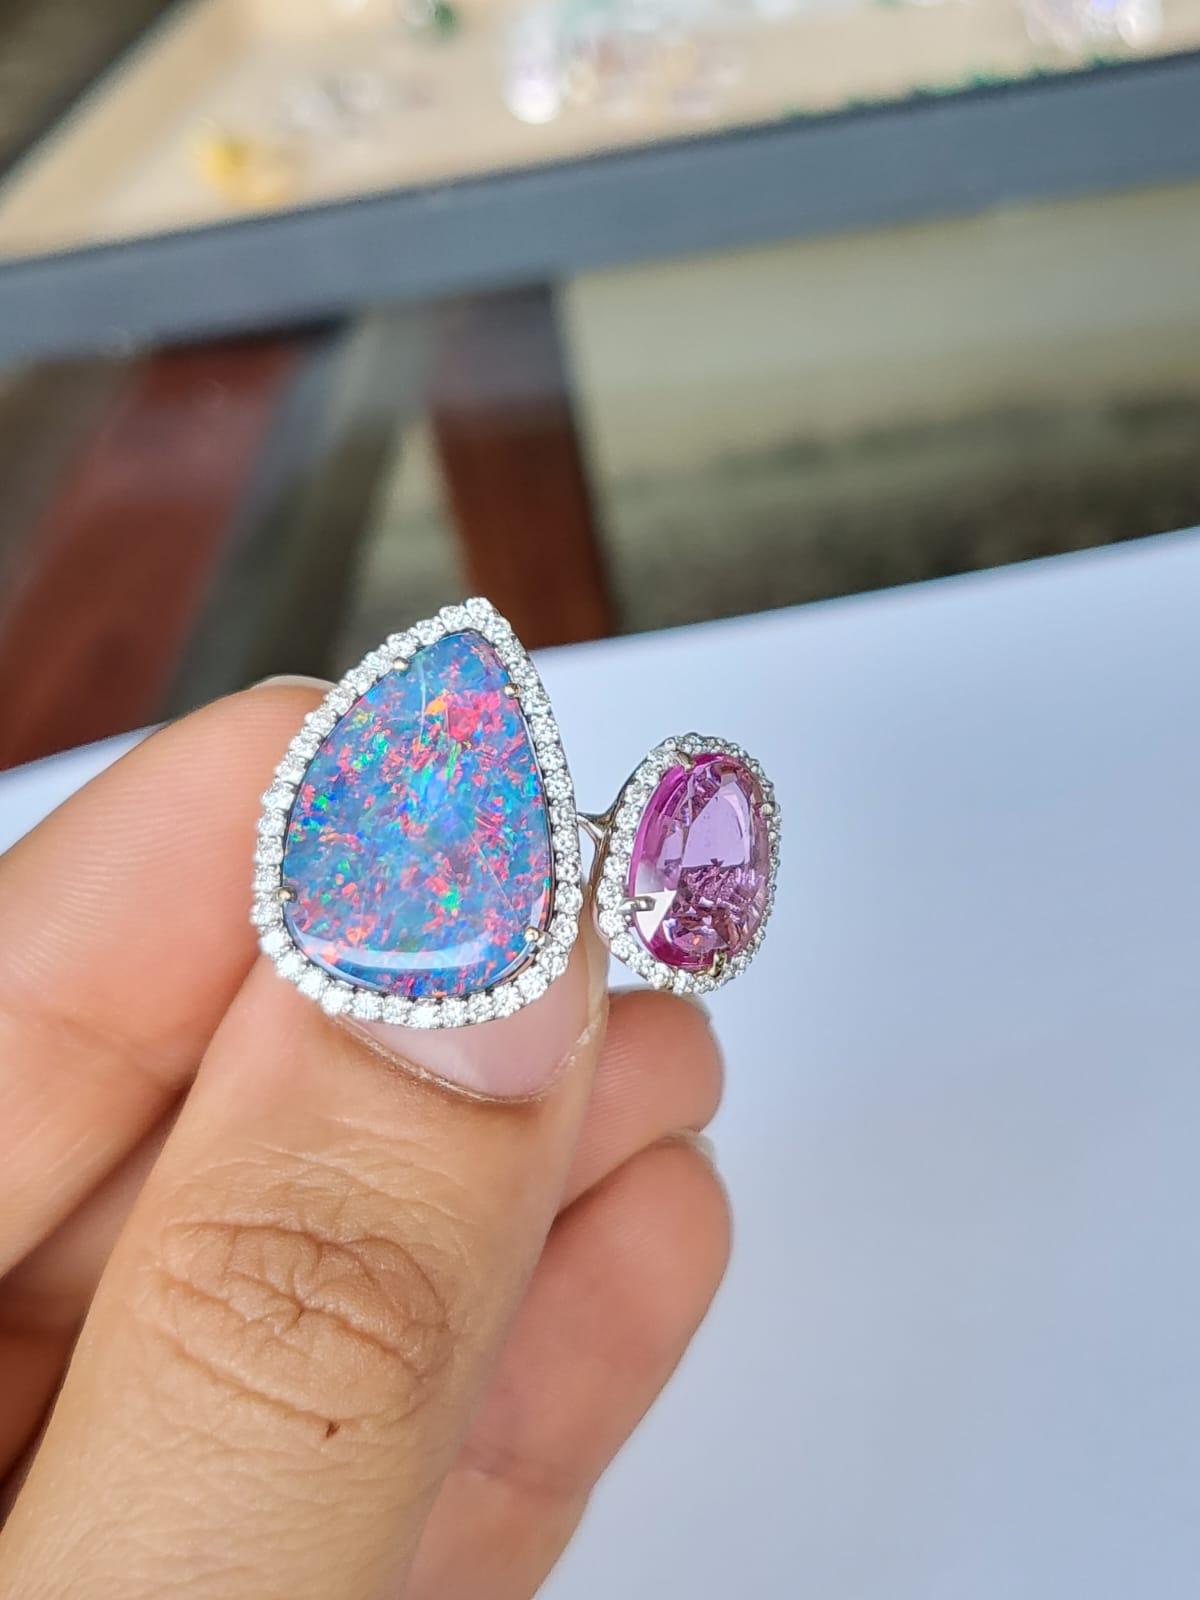 A very gorgeous and beautiful, Doublet Opal & Pink Sapphire Cocktail Ring set in 18K White Gold & Diamonds. The weight of the Doublet Opal is 7.19 carats. The Doublet Opal is of Australian origin. The Opal has a red, green and blue play of colour.